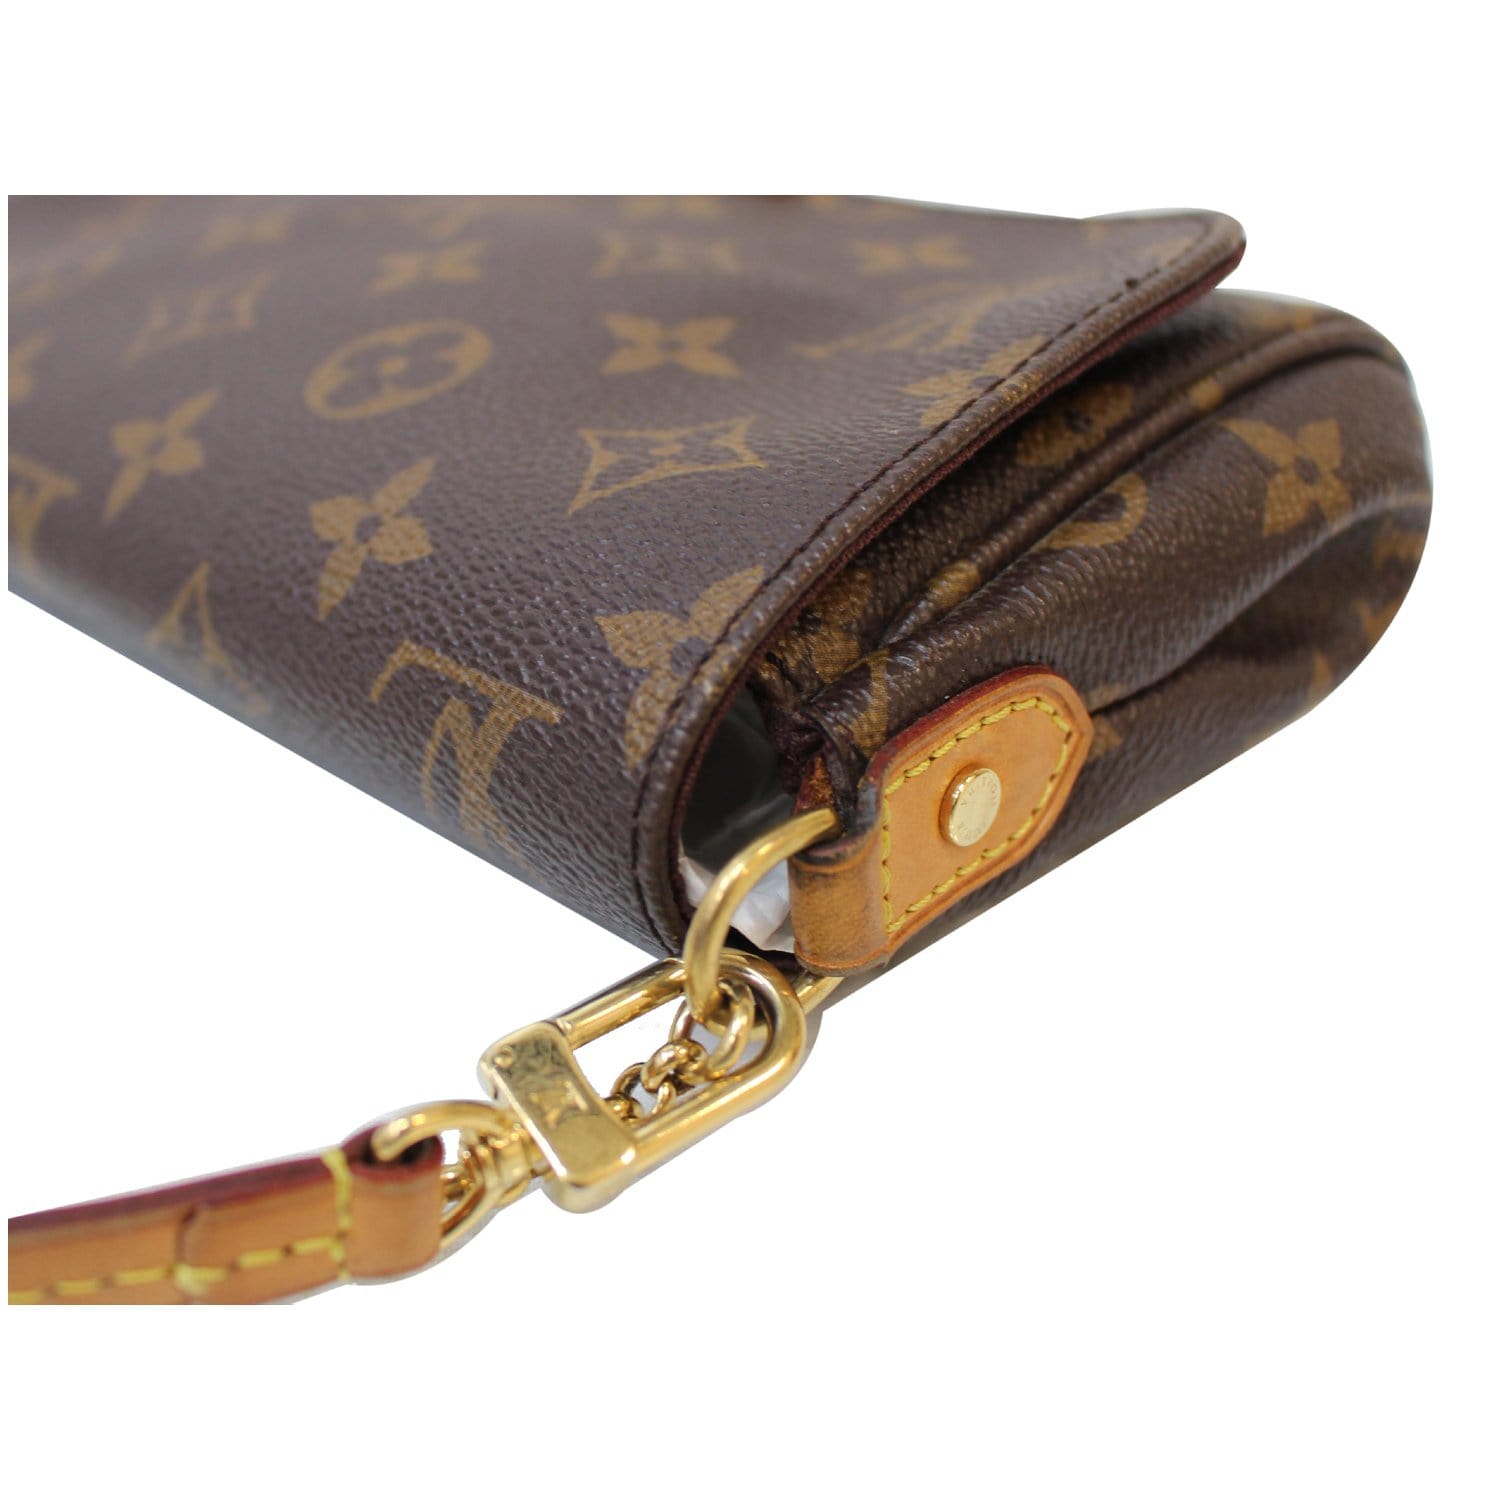 Félicie strap & go leather crossbody bag Louis Vuitton Brown in